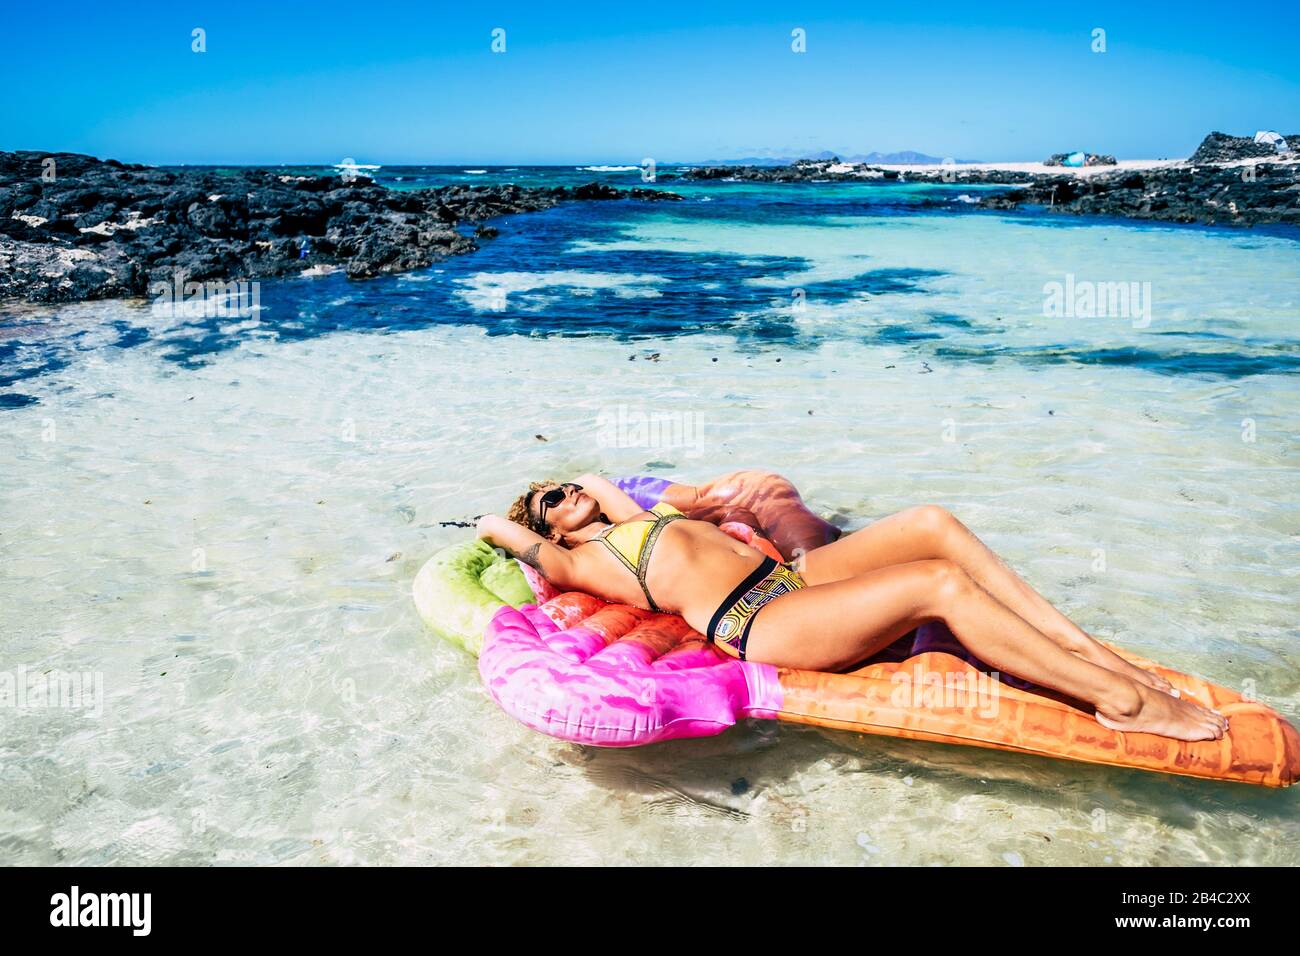 Beautiful young woman have sun bath relaxing on a trendy lilo inflatable mattress in a blue tropical ocean lagoon with sand and rocks - haven and paradise concept for travel and lifestyle Stock Photo